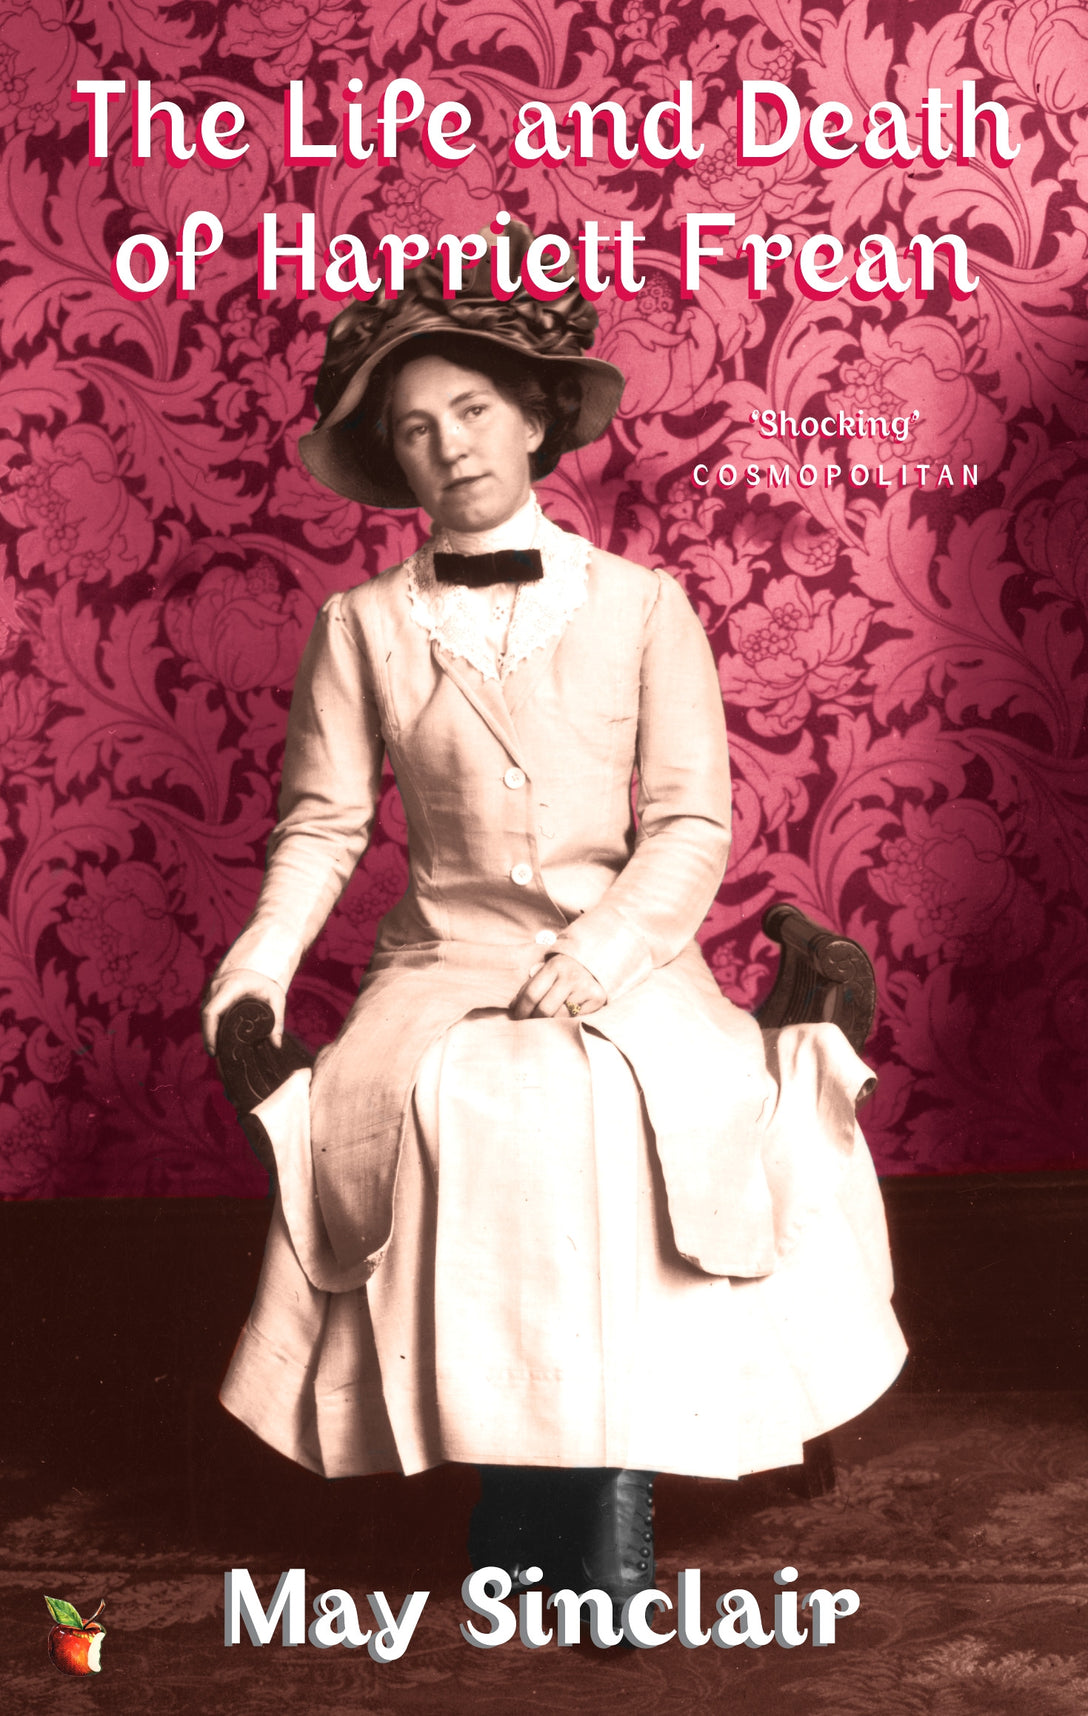 The Life And Death Of Harriett Frean by May Sinclair